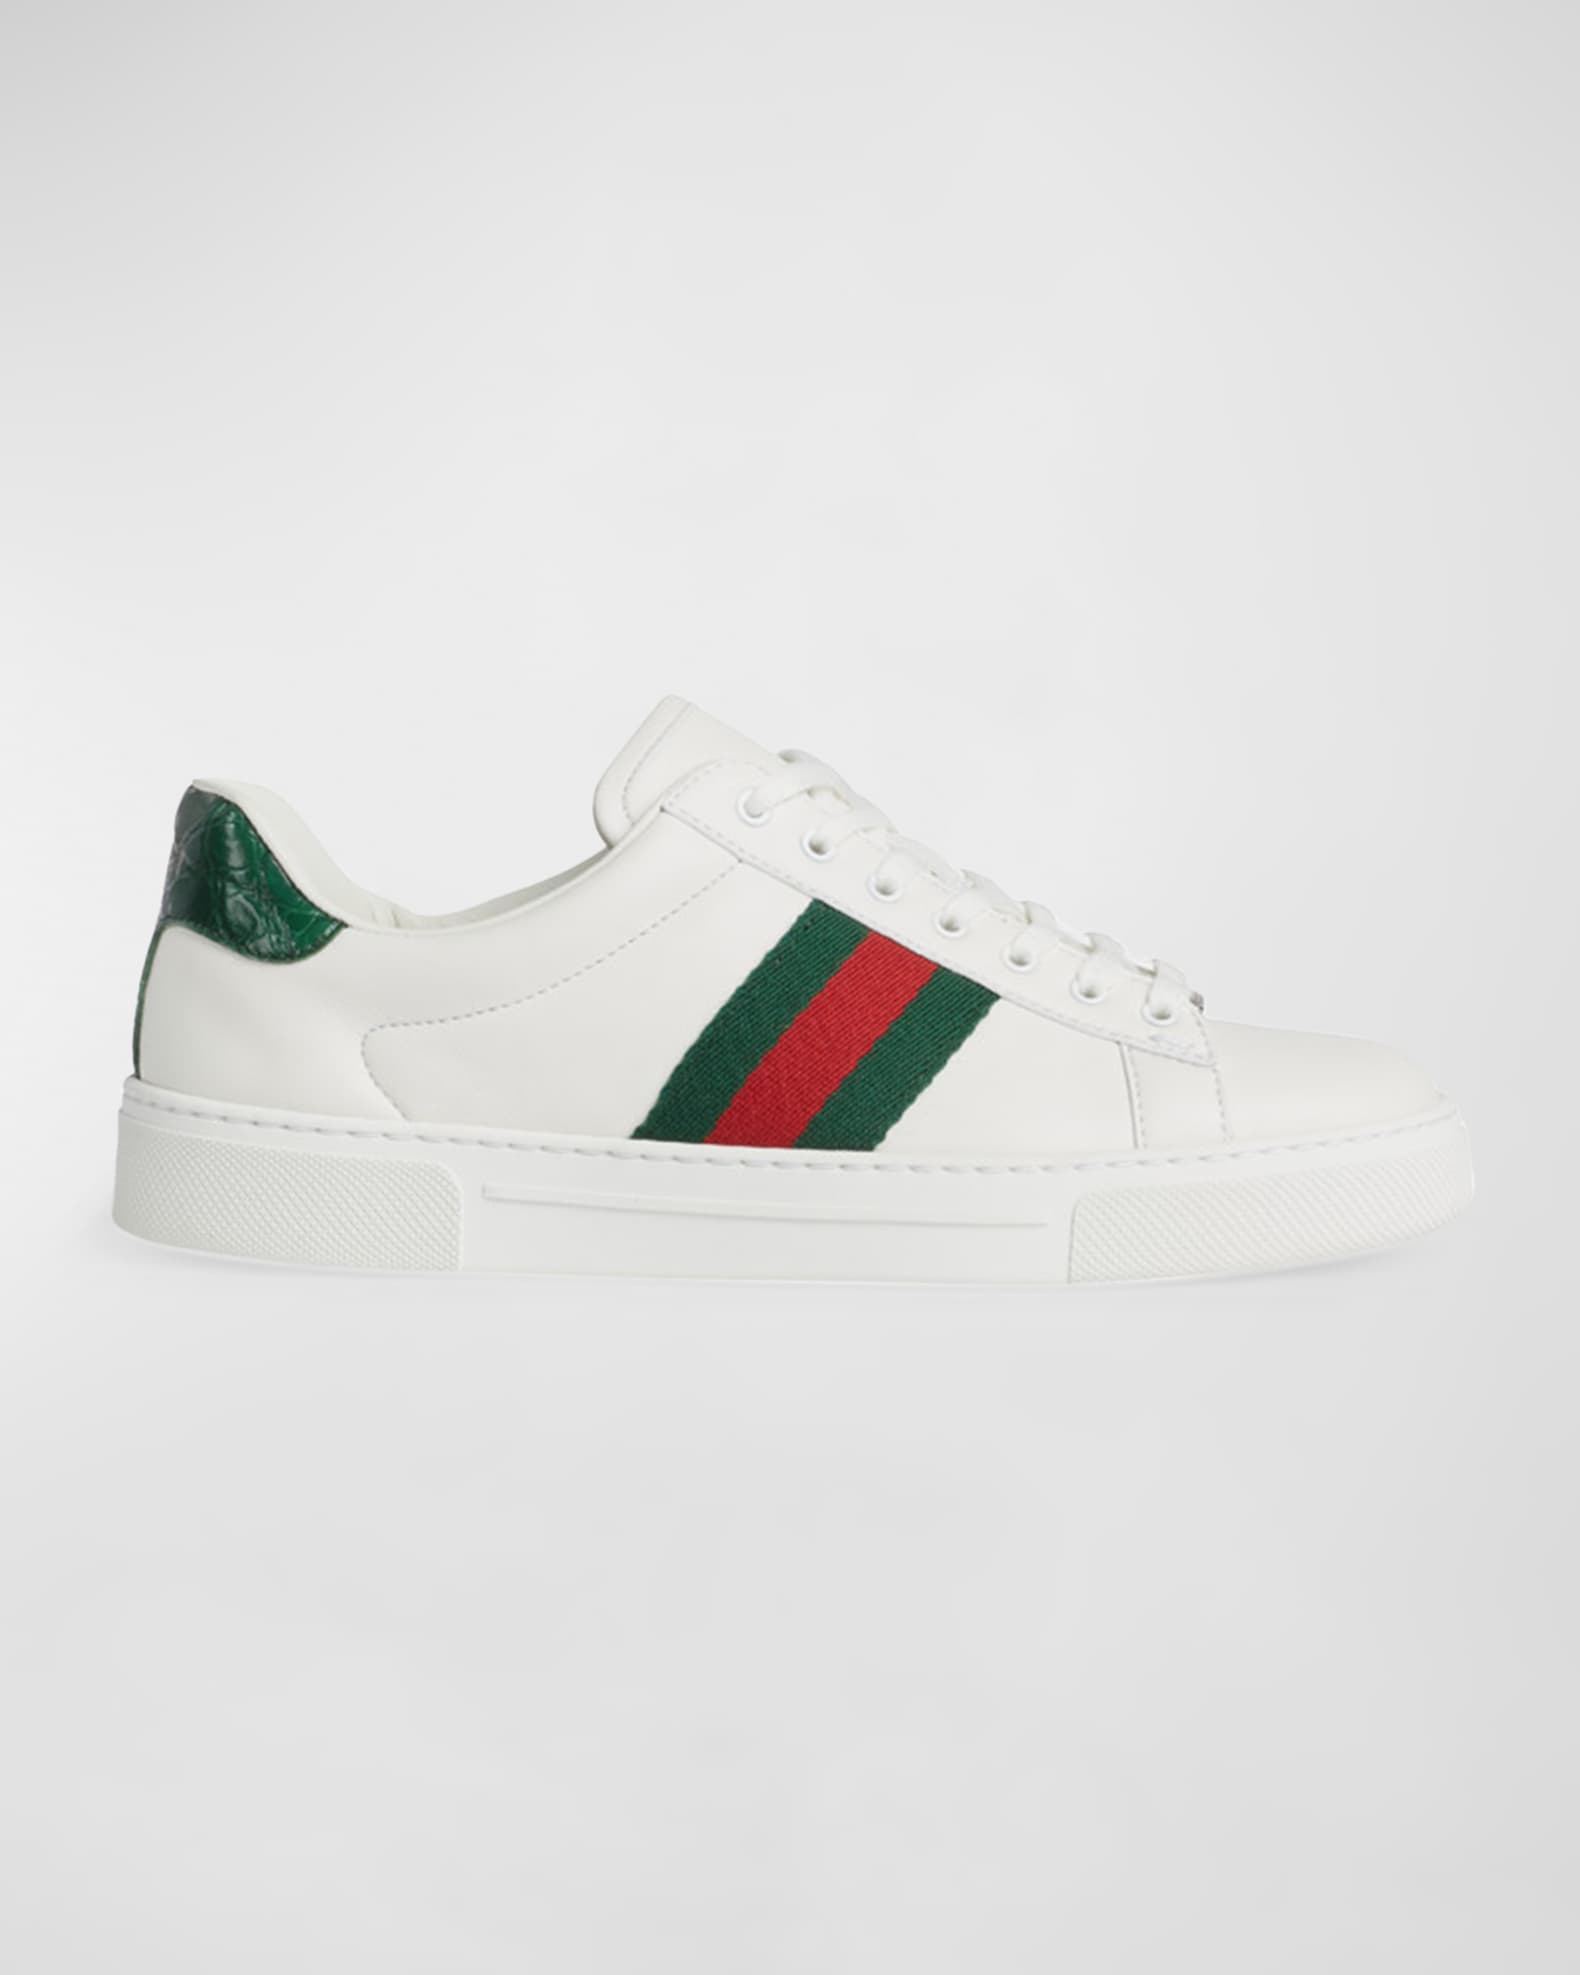 Gucci Ace Leather Web Low-Top Sneakers | Neiman Marcus